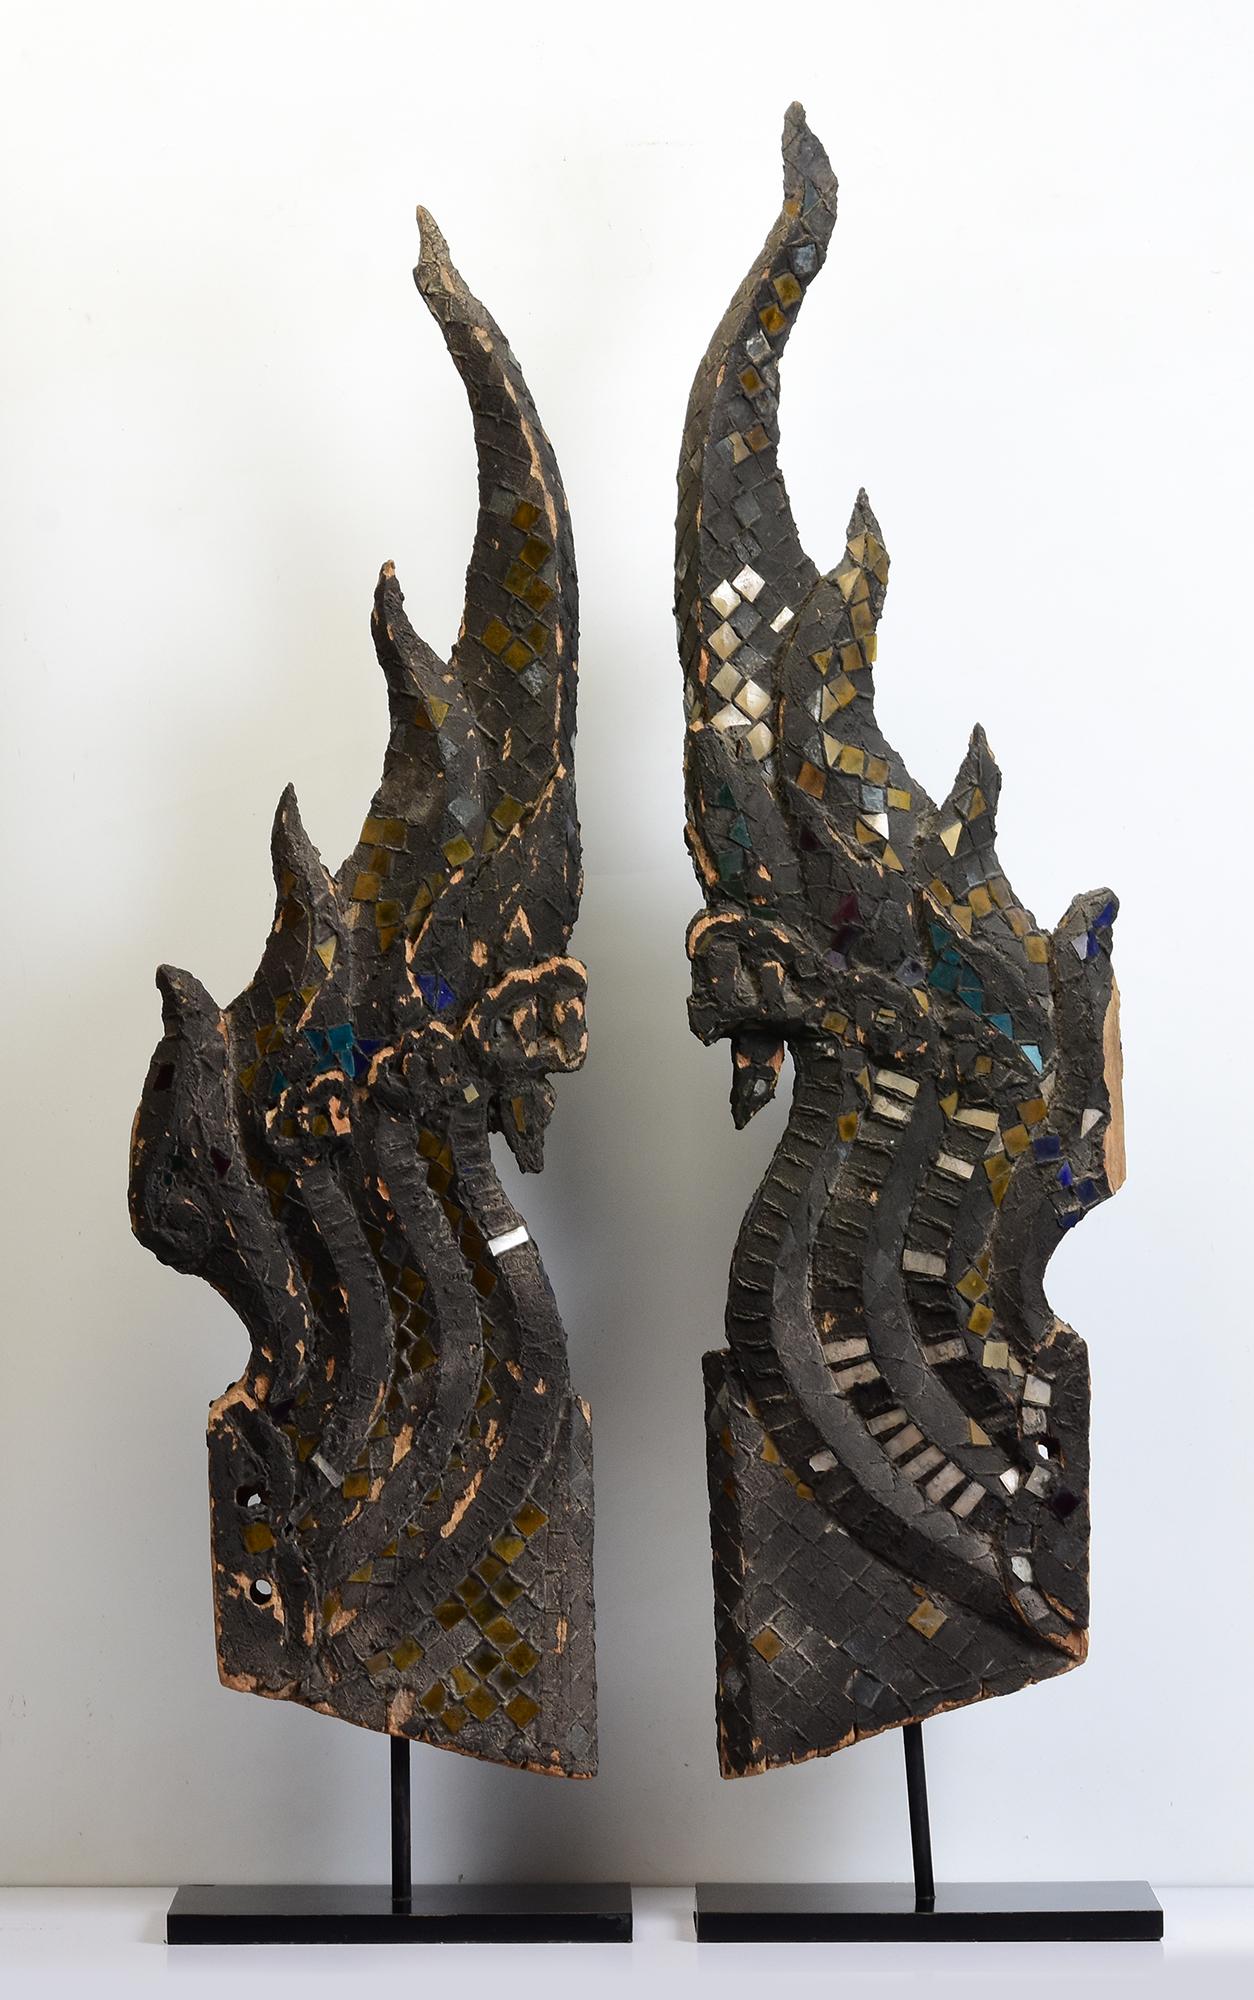 A pair of antique Thai wooden finial Naga carved on both sides and decorated with mirror-tiles, used for decoration on top of the temple's roof. 

Age: Thailand, Late Ayutthaya Period, 18th Century
Size of Naga only: Height 104 - 110 C.M. / Width 29